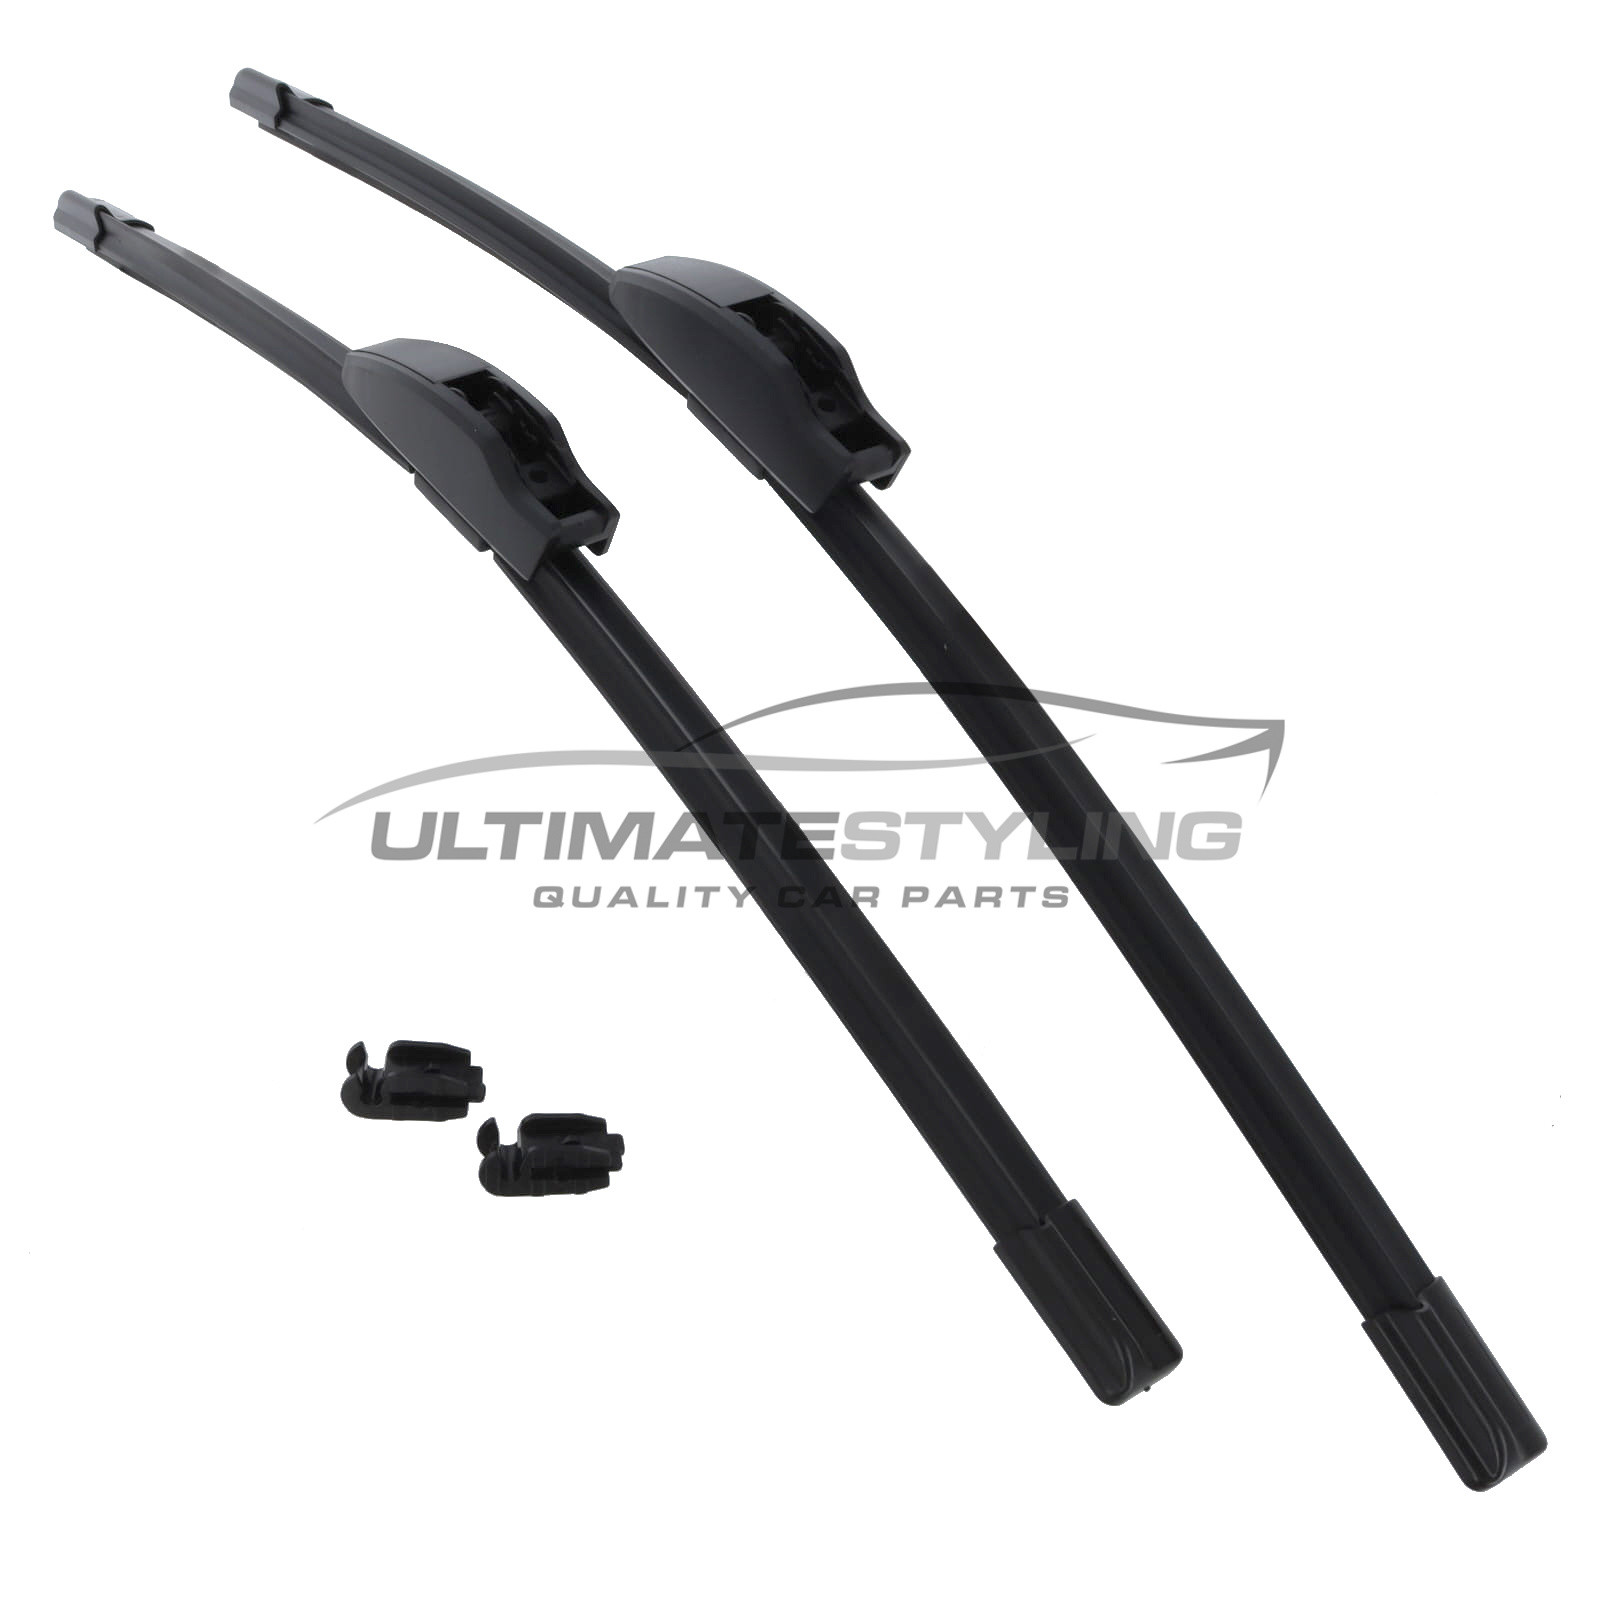 Drivers Side & Passenger Side (Front) Wiper Blades for Hyundai Lantra